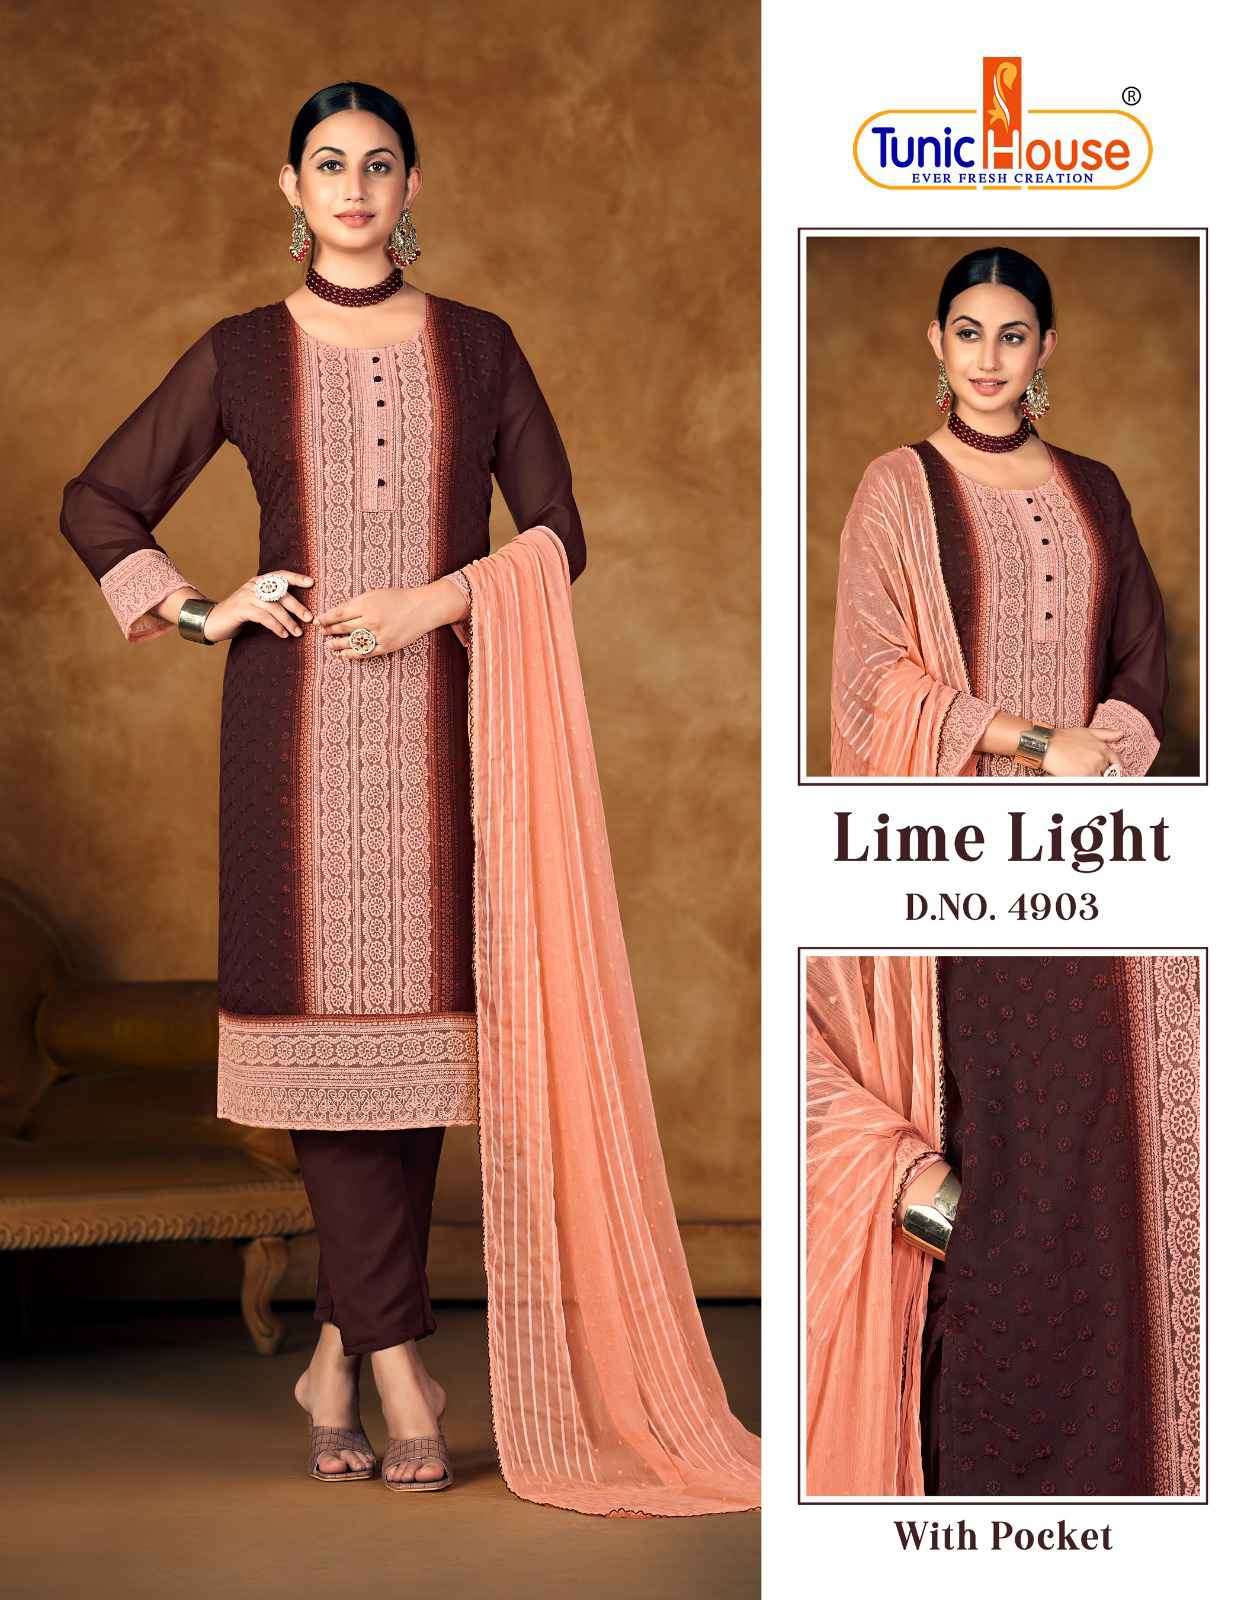 Tunic House Lime Light Fancy Lucknowi Style Combo Designs Suit